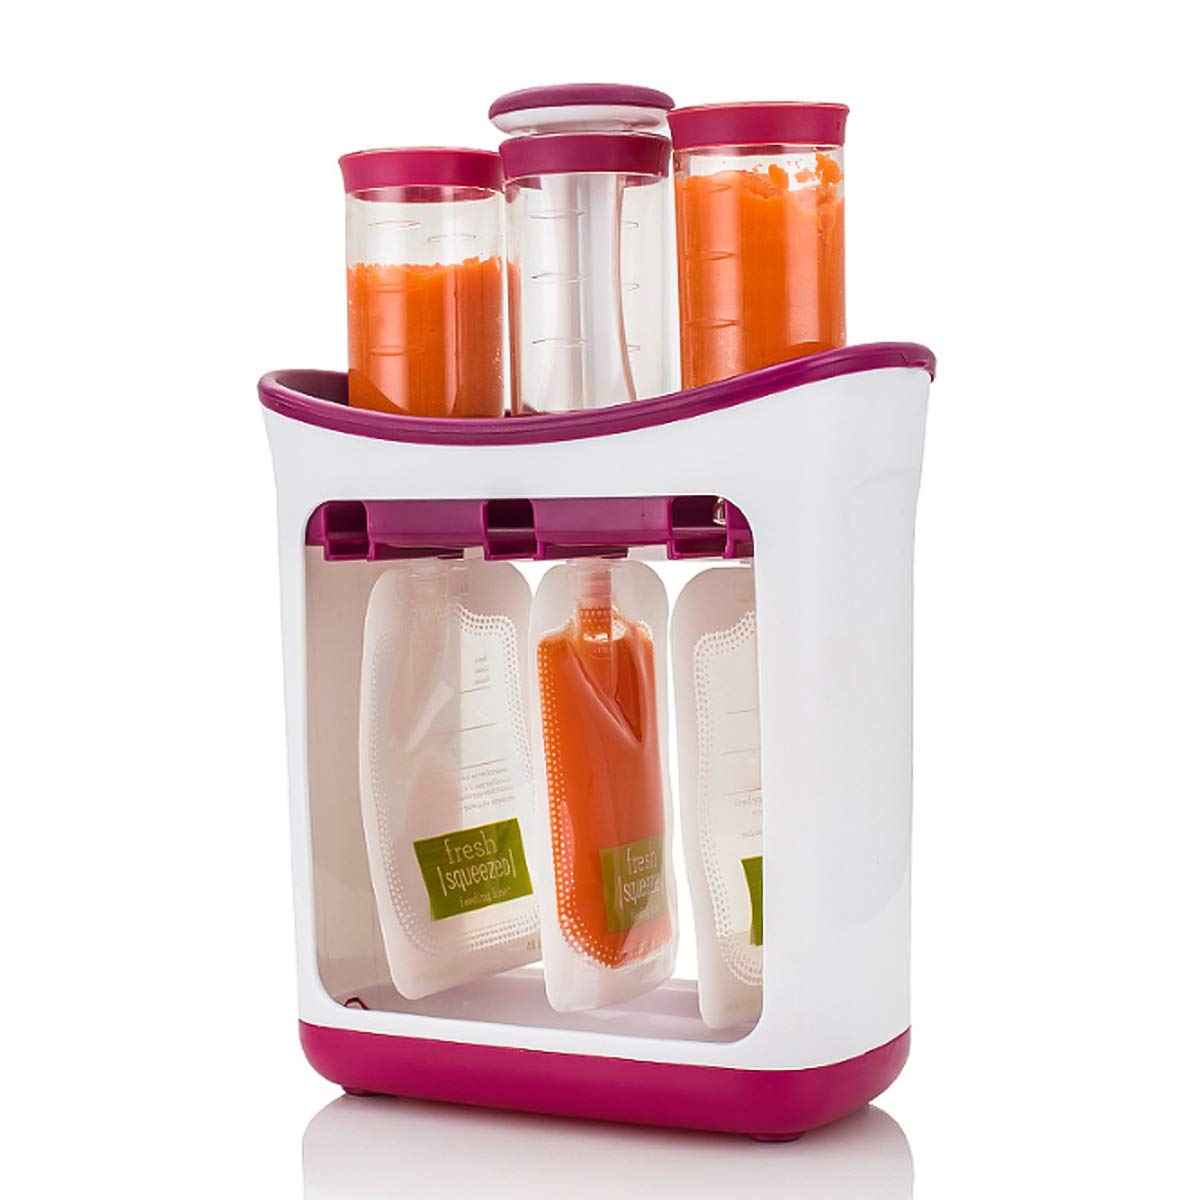 Squeeze Station Homemade Infant Baby Fresh Fruit Juice Food Maker with Storage Bags 8.26"x8.66"x3.54"